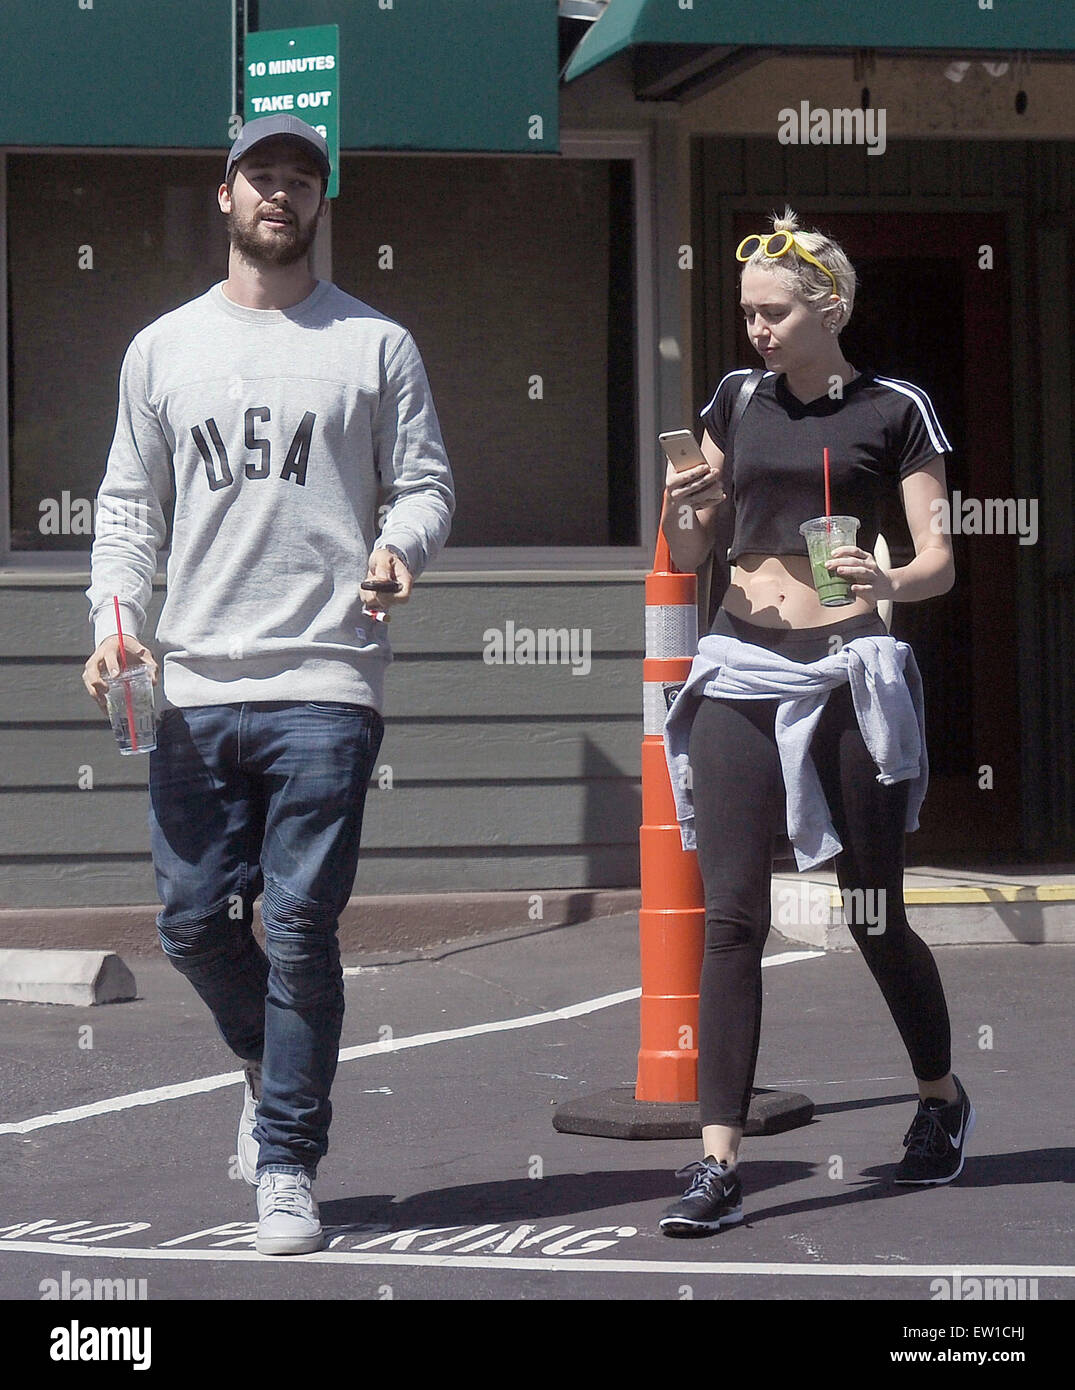 Miley Cyrus and Patrick Schwarzenegger have lunch together Featuring: Miley  Cyrus, Patrick Schwarzenegger Where: Los Angeles, California, United States  When: 02 Apr 2015 C Stock Photo - Alamy